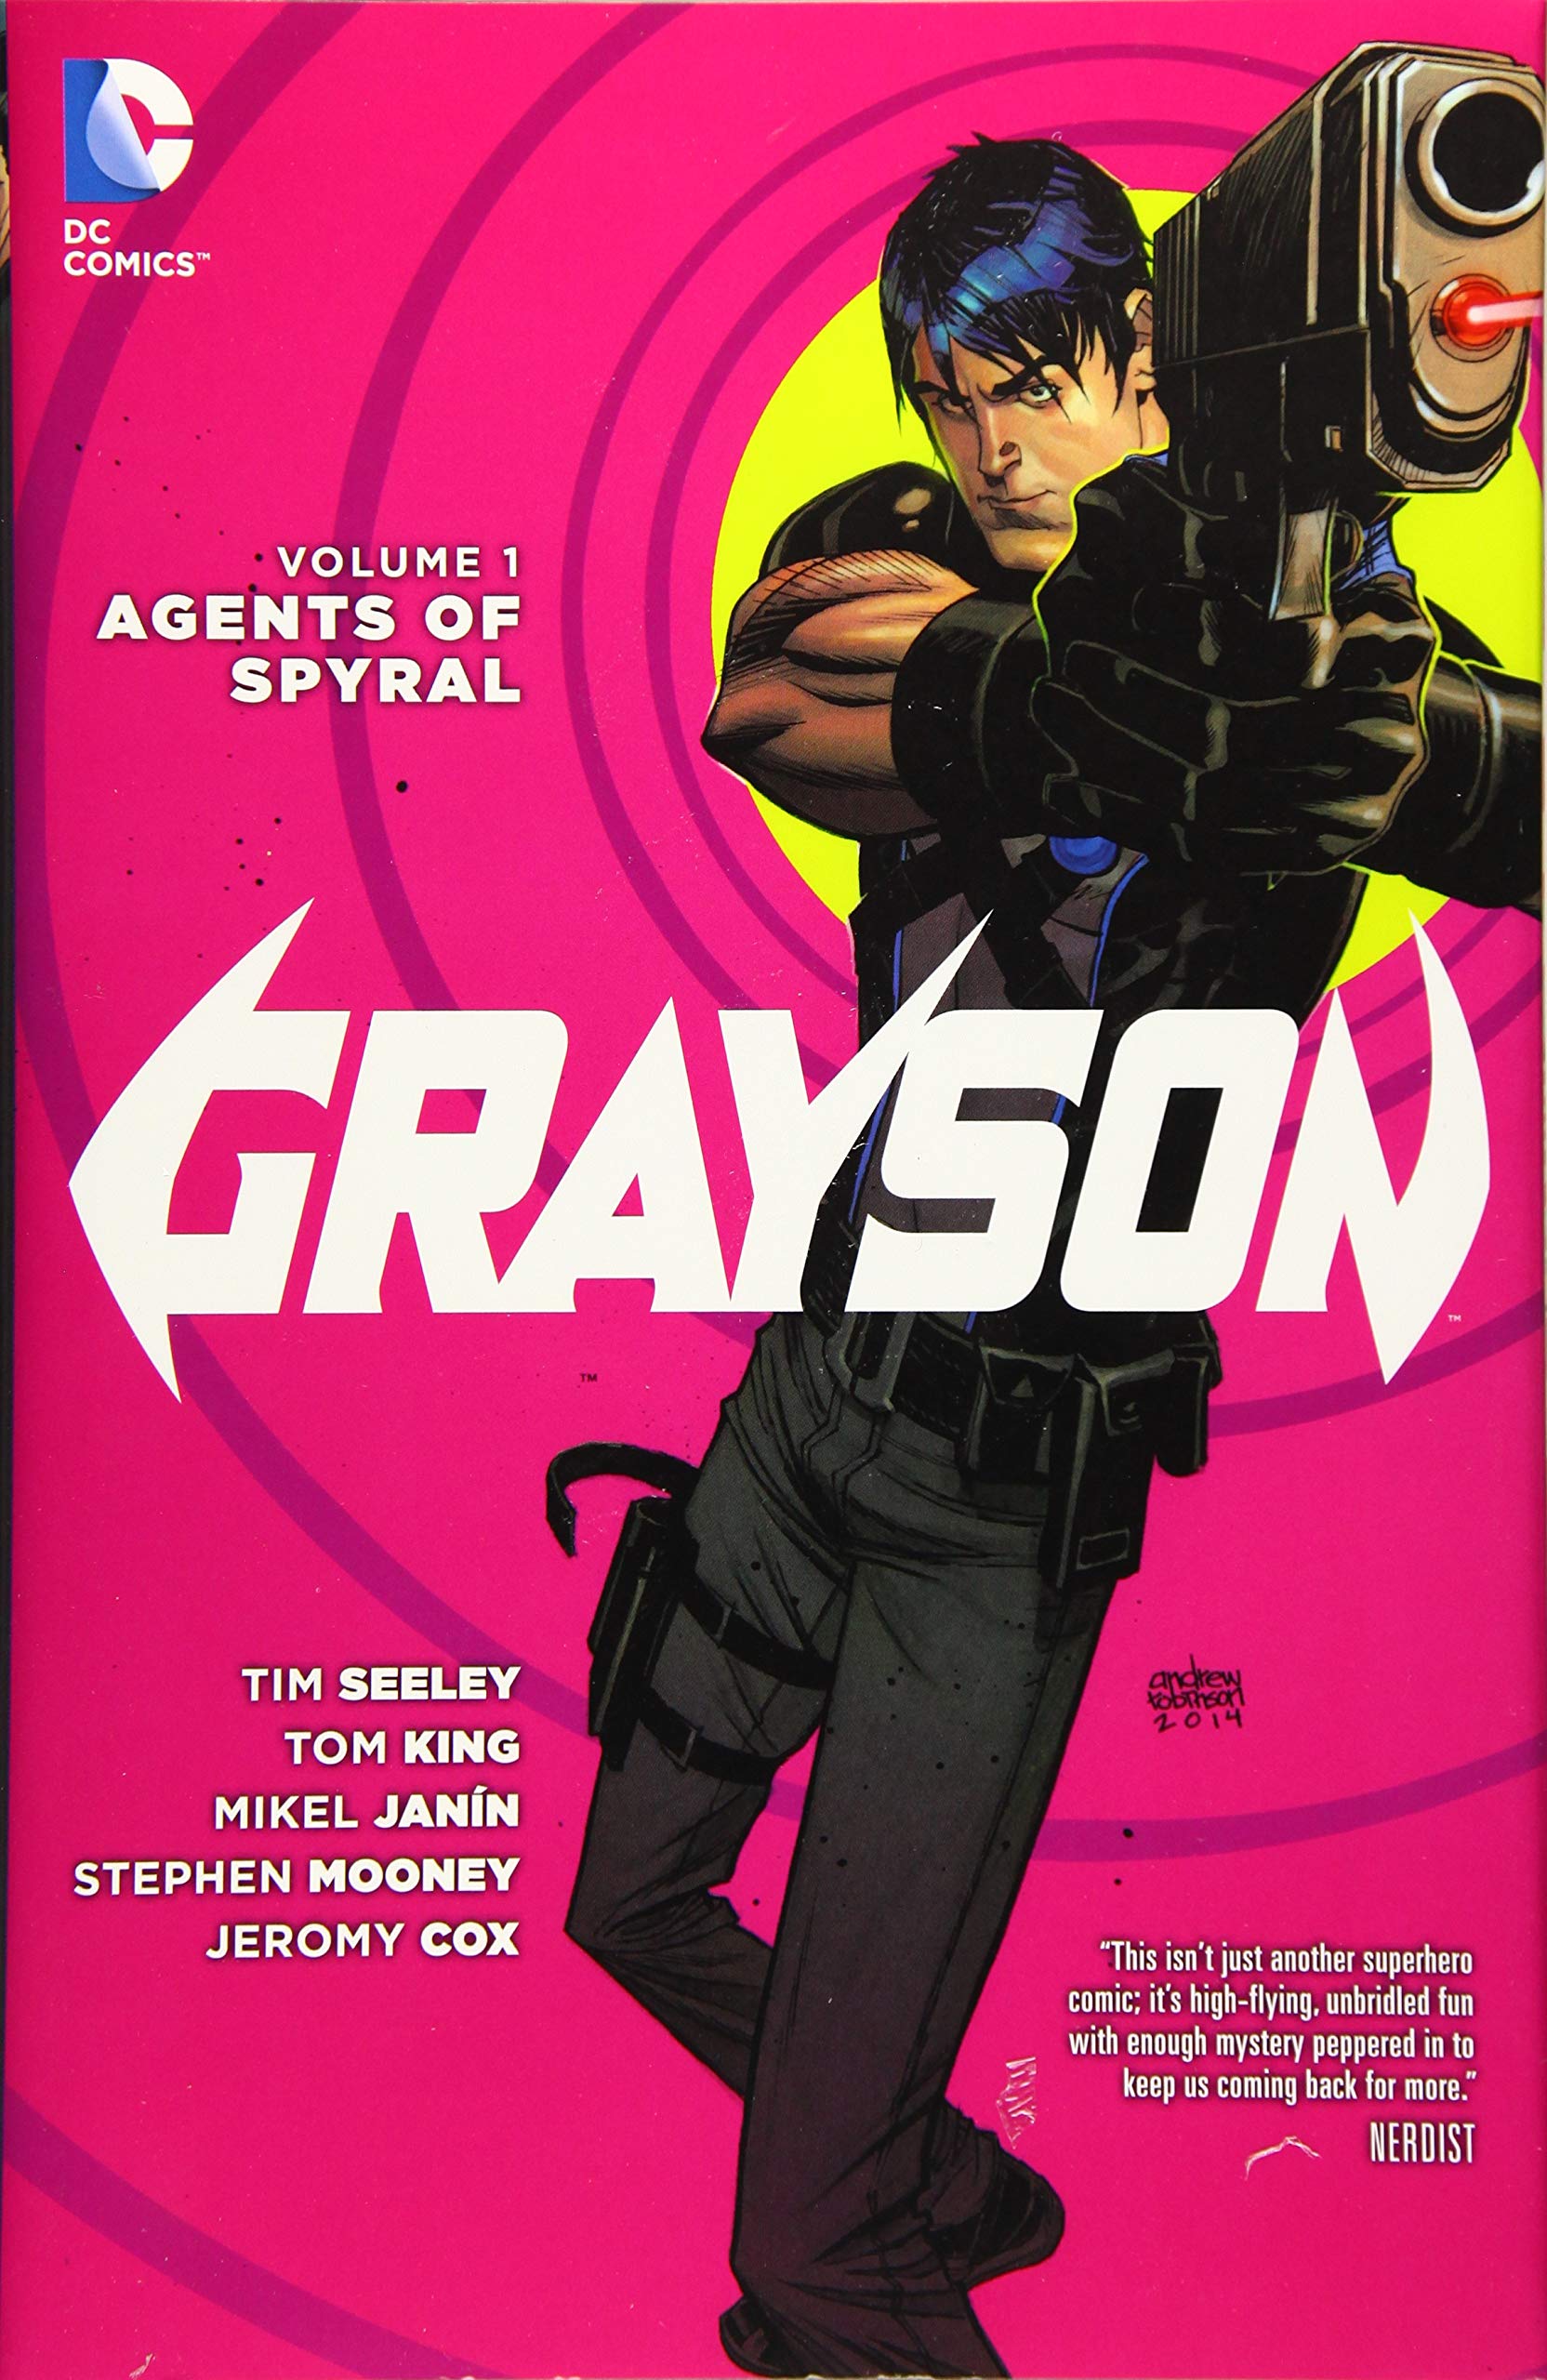 Grayson Hardcover Volume 1 Agents of Spyral (New 52)